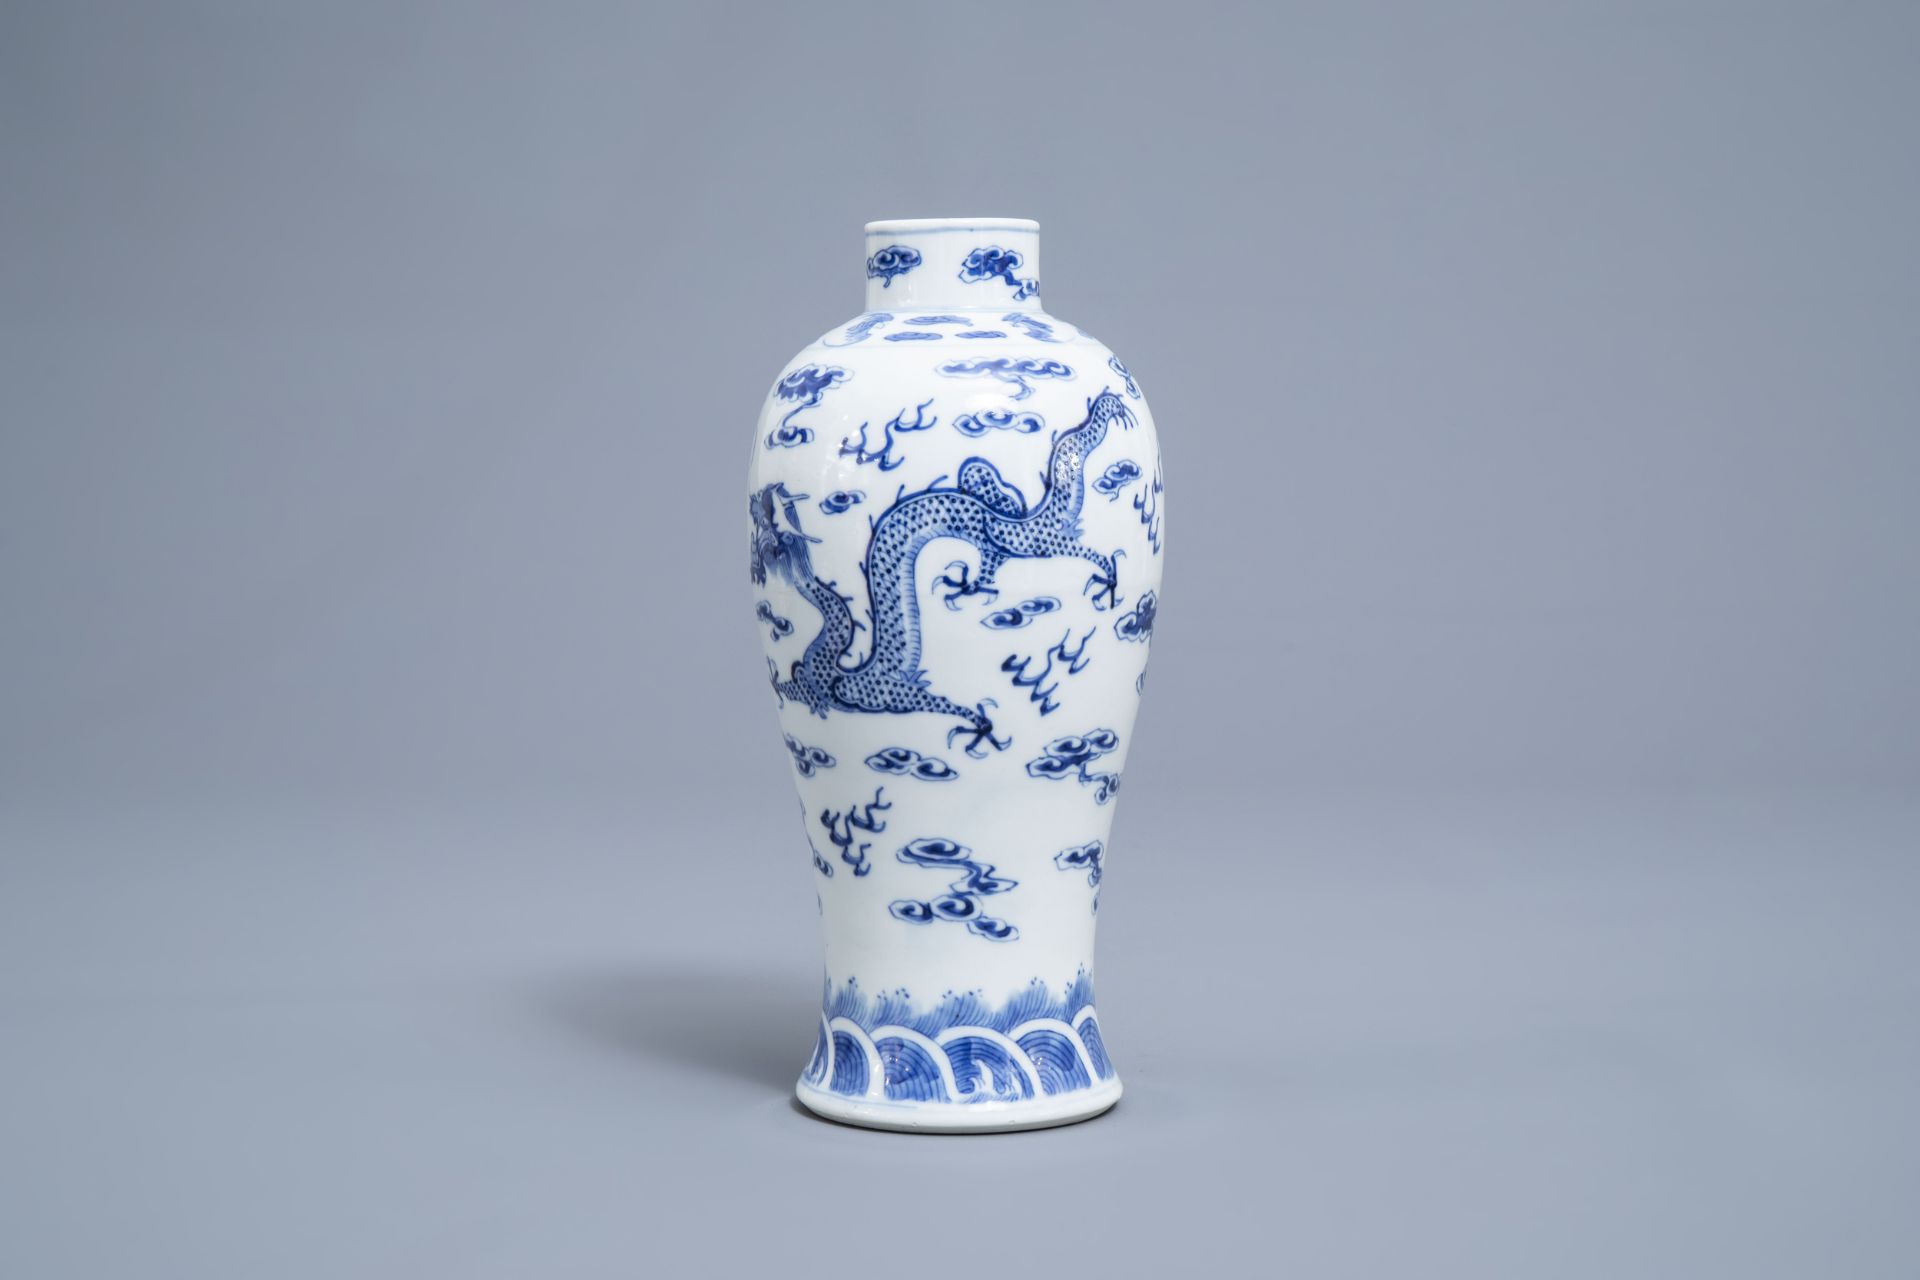 A varied collection of Chinese blue, white and famille rose porcelain, 18th C. and later - Image 33 of 42